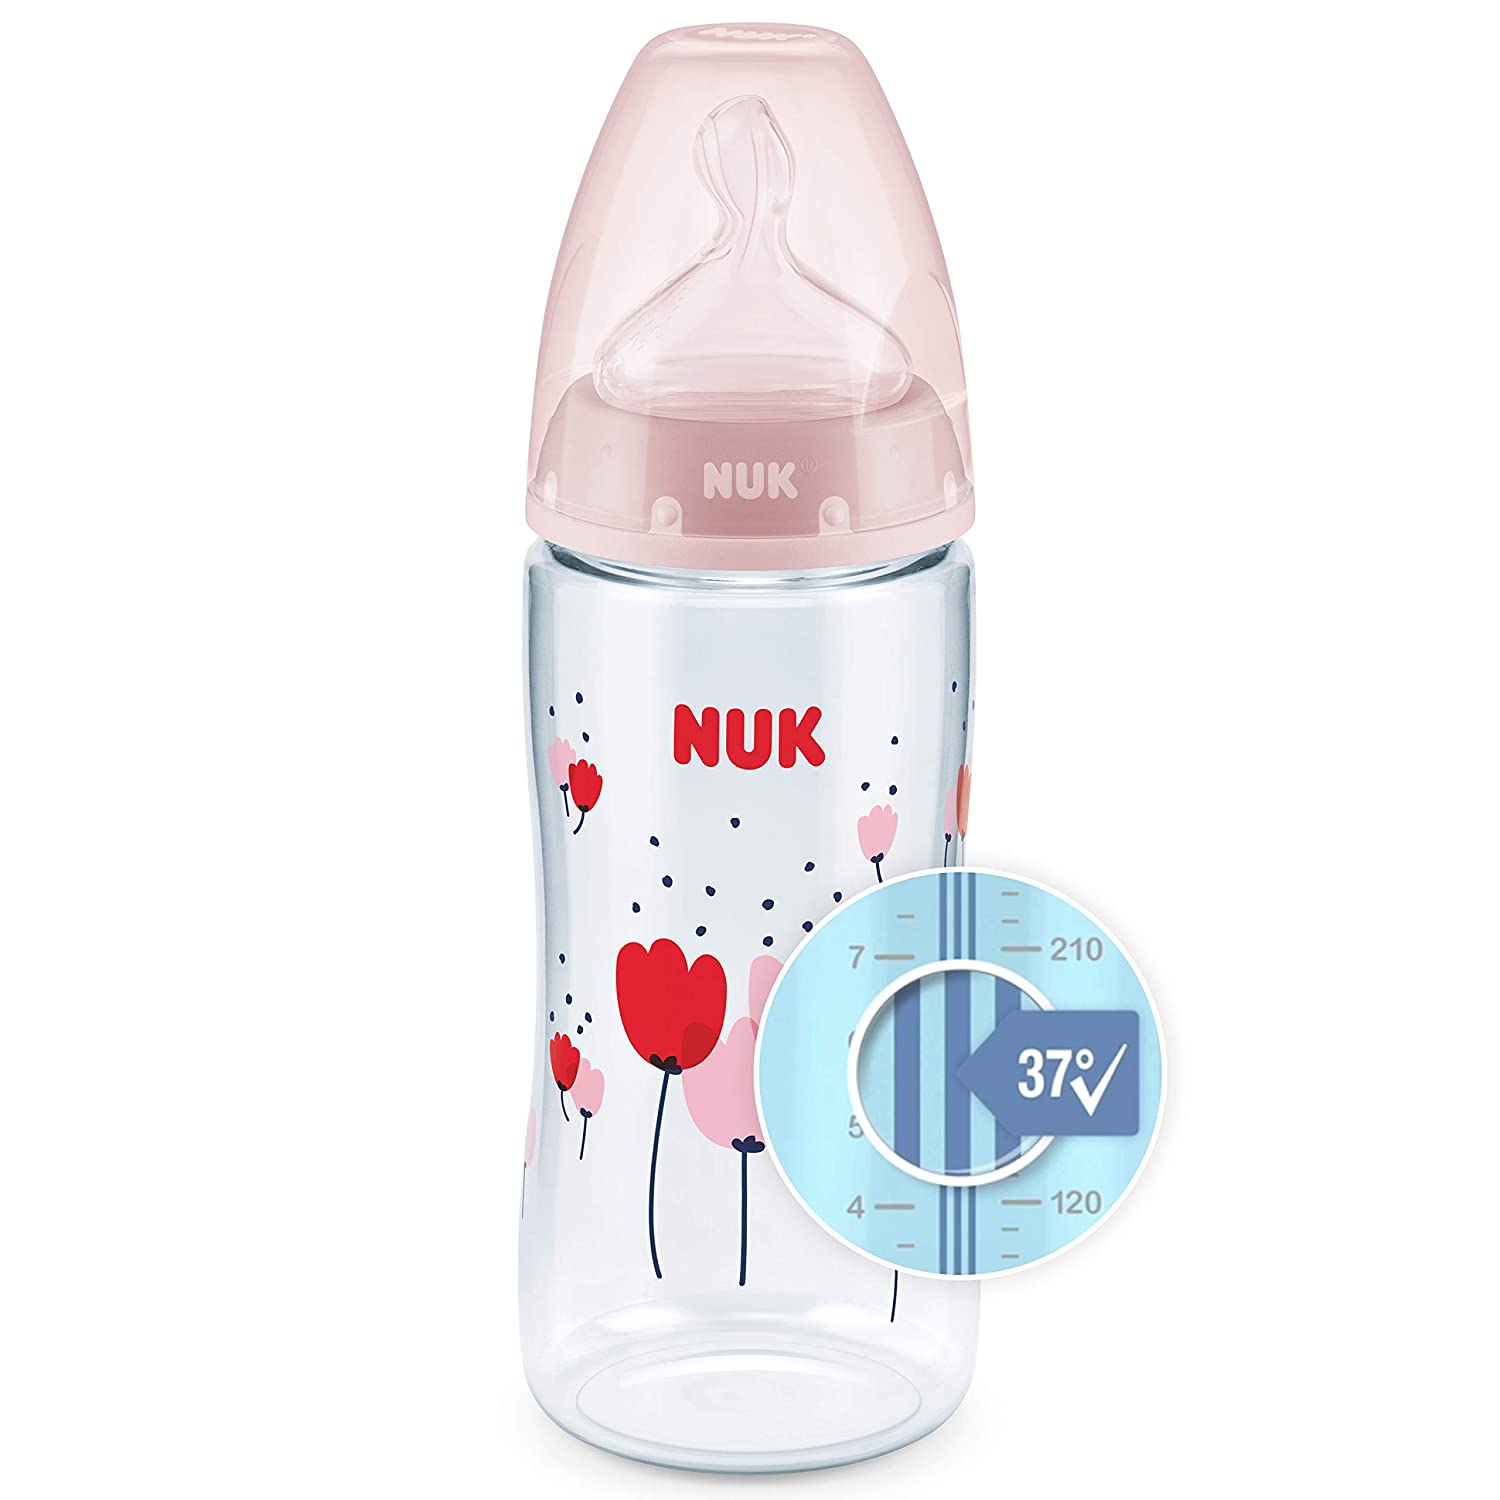 NUK First Choice+ Baby Bottle with Temperature Control Display pink